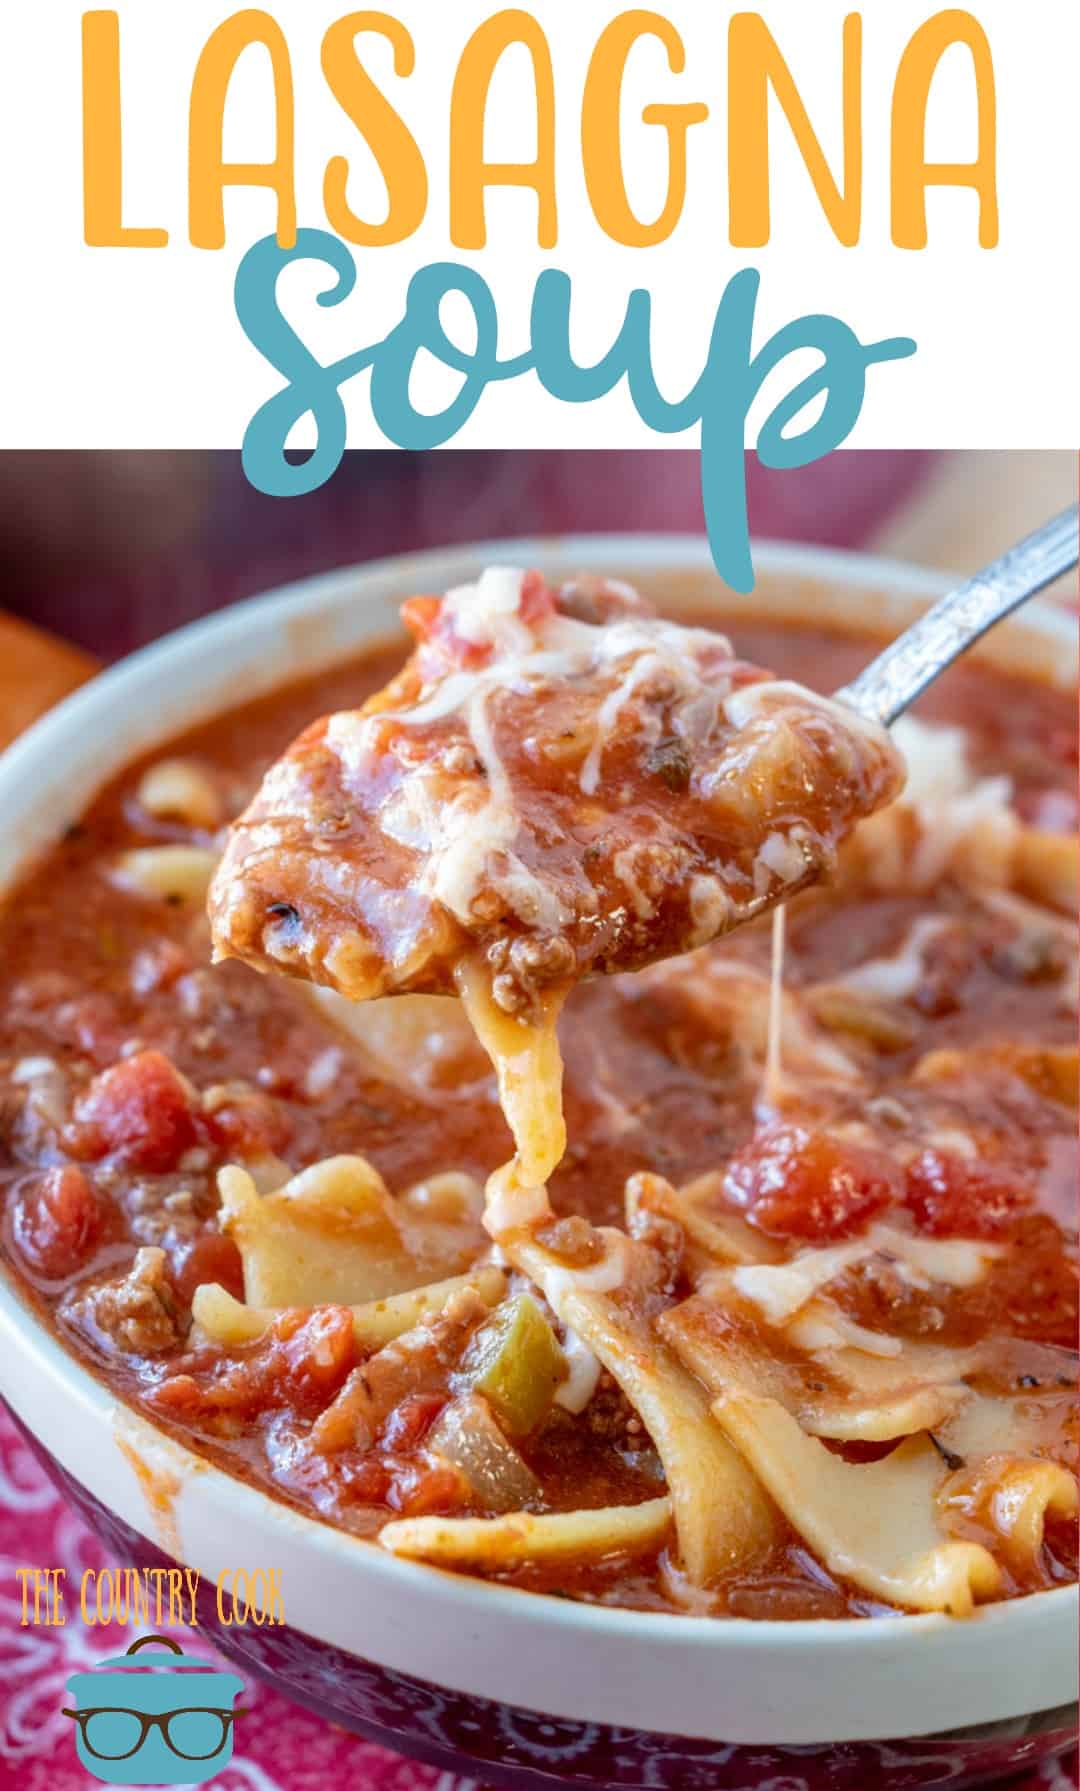 a spoon scooping up some lasagna soup from a white bowl.